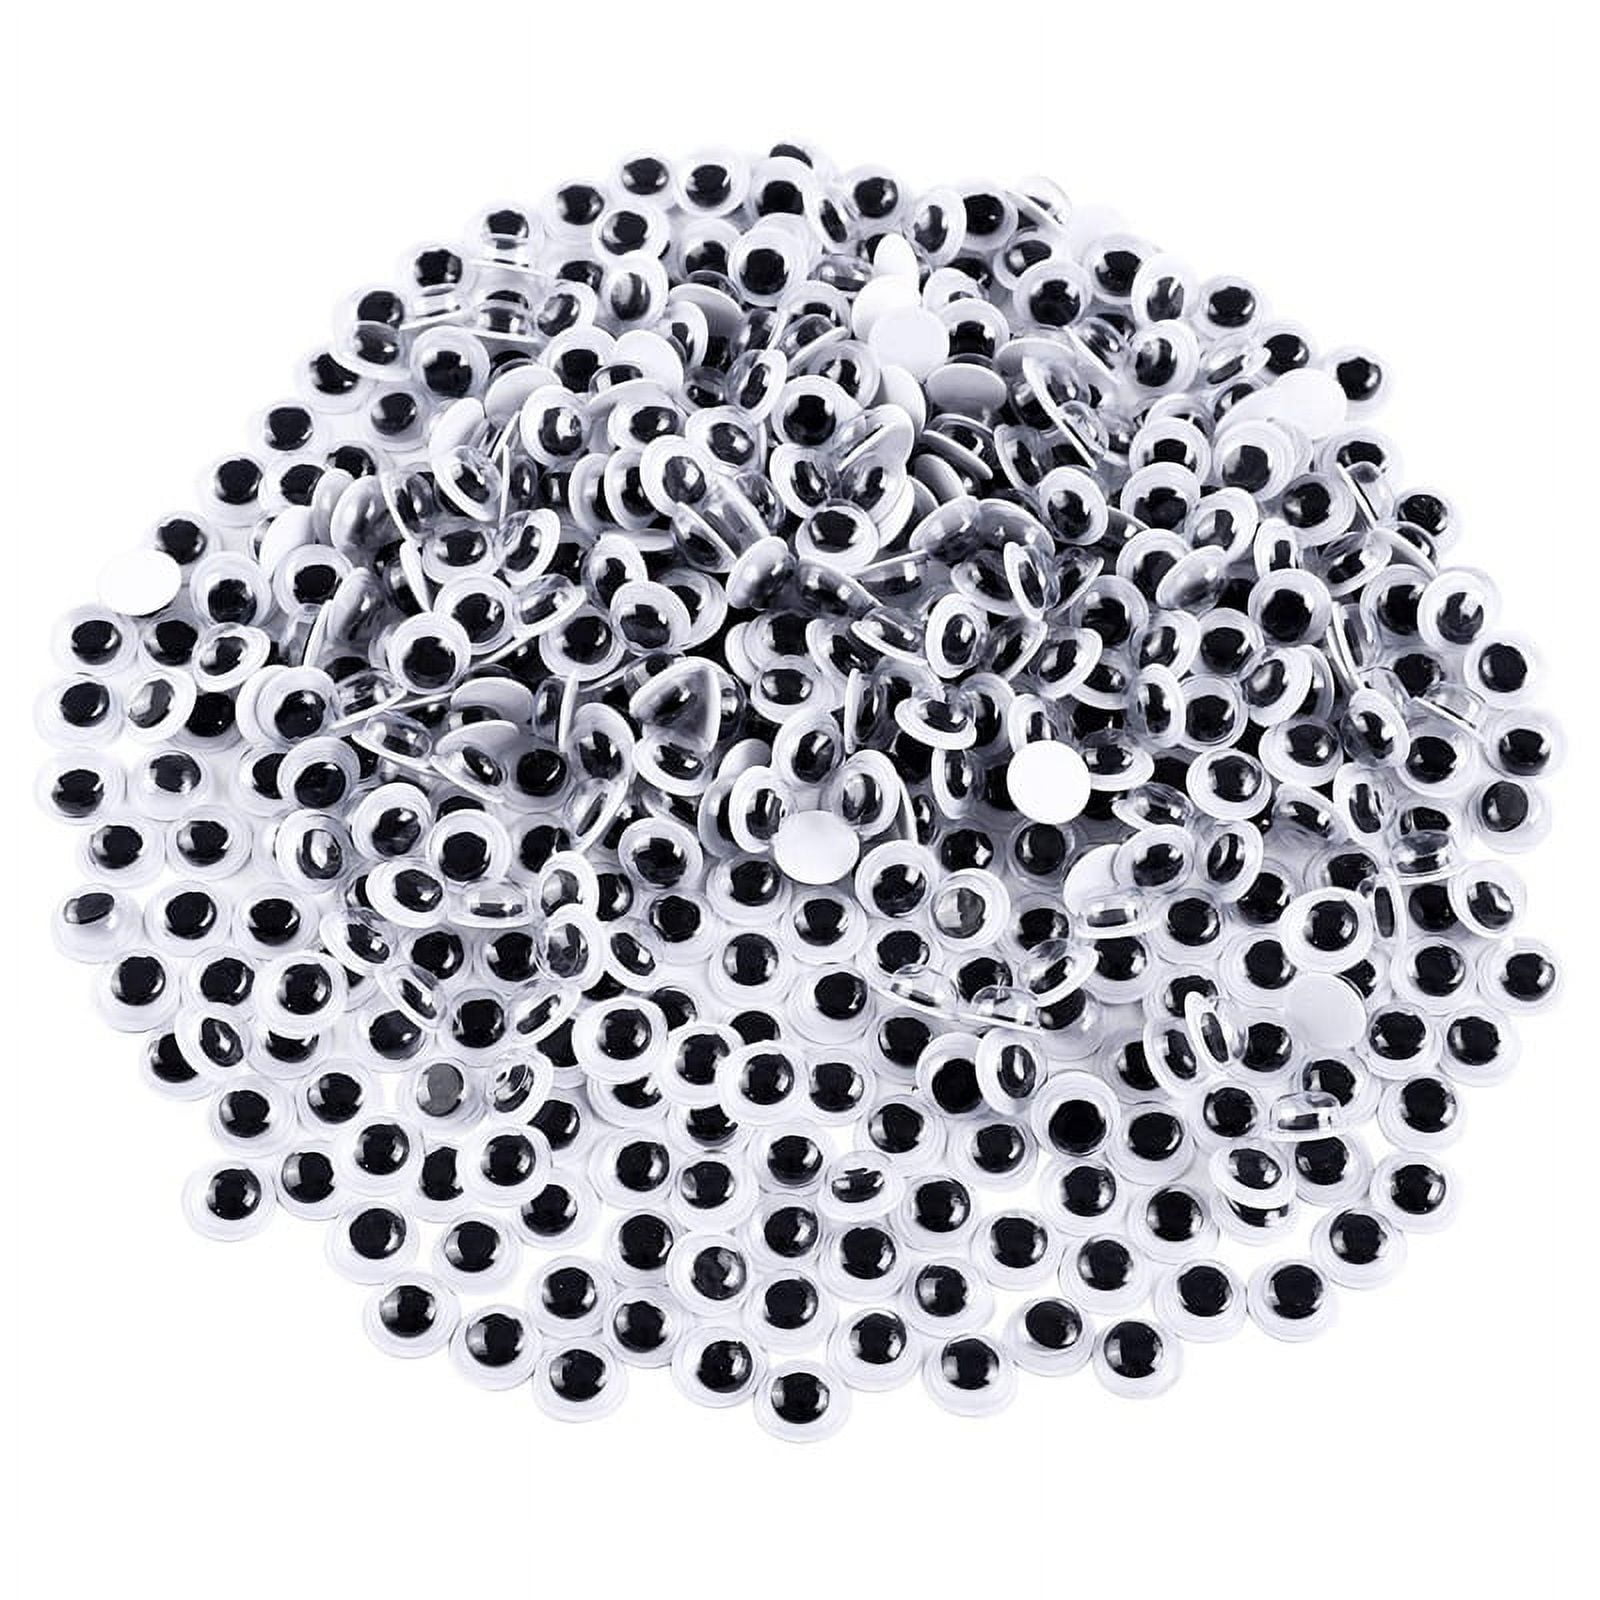 50-600Pcs Self-Adhesive Googly Eyes For Scrapbooking Crafts Projects DIY  Dolls Accessories Eyes Handmade Toys Art Supplies